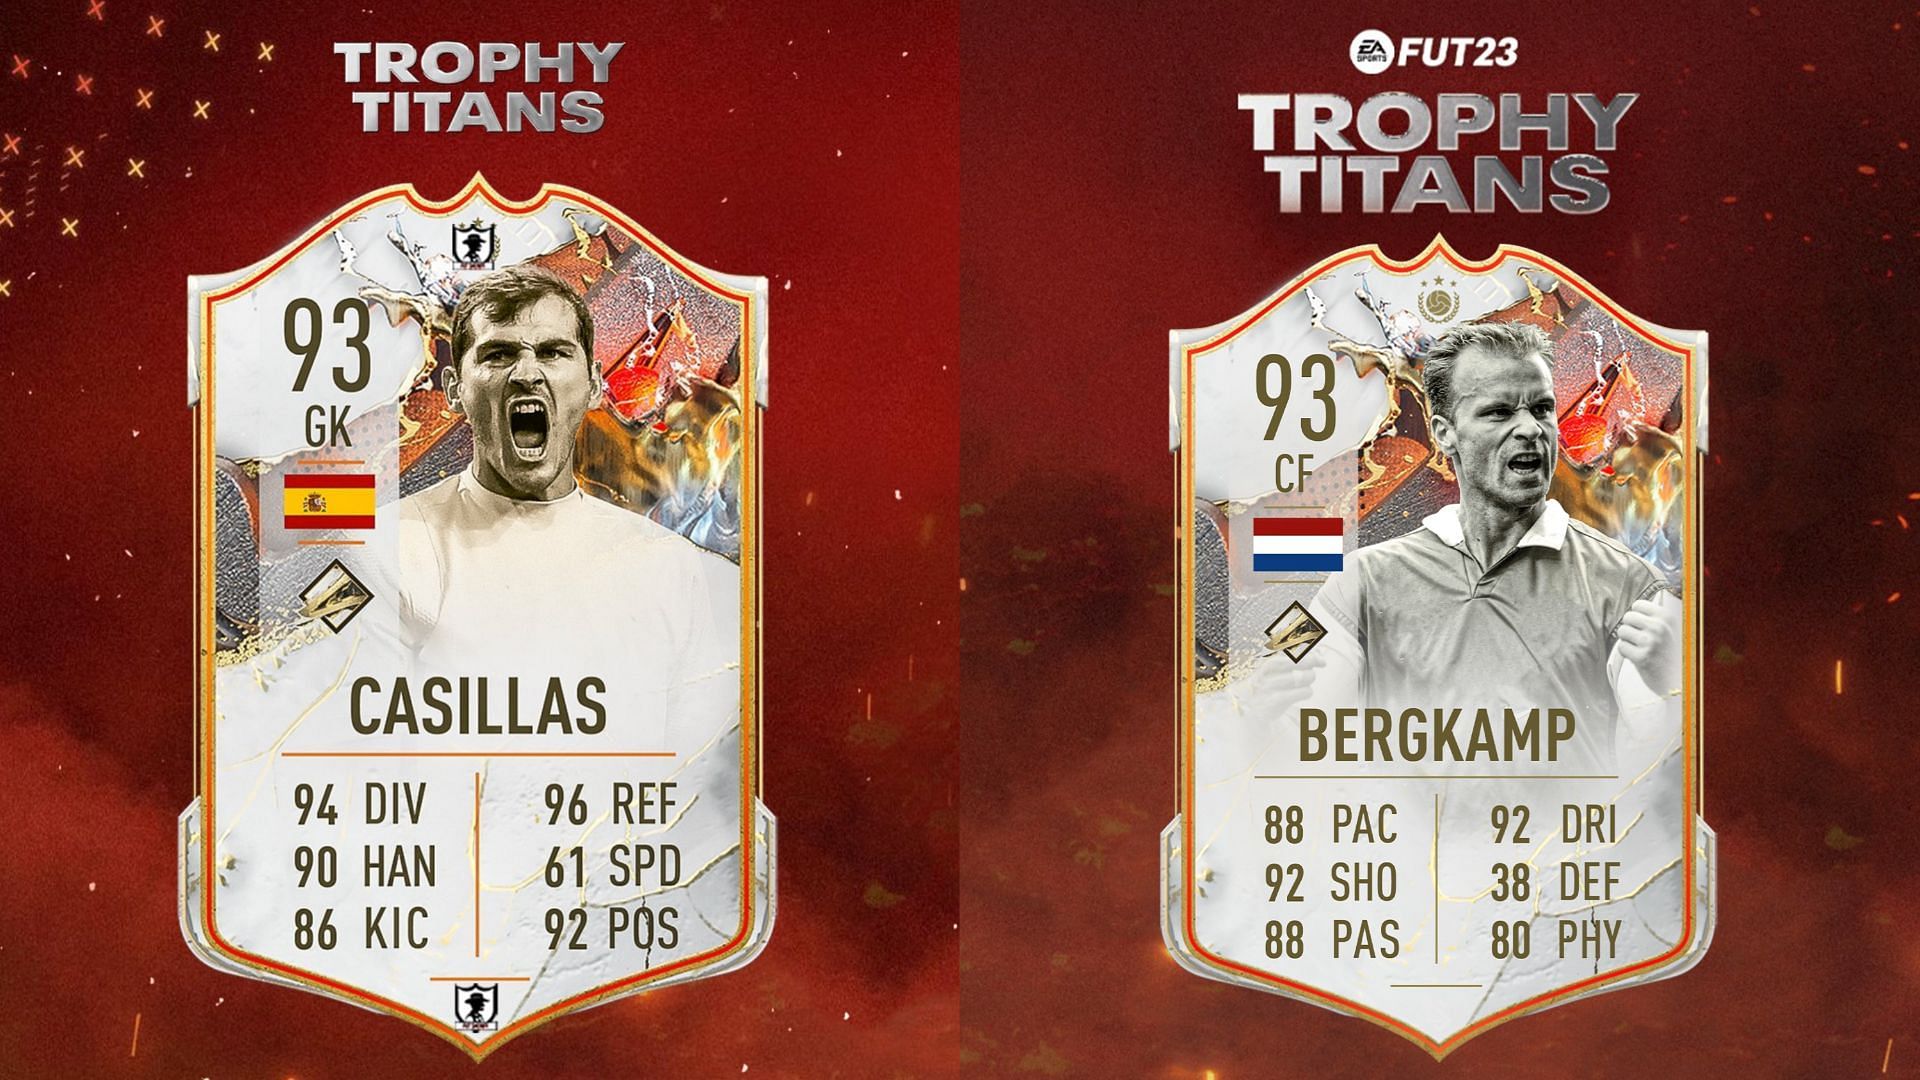 The Trophy Titans versions of Casillas, Keane, and Bergkamp could dominate the FIFA 23 meta (Images via Twitter/FUT Sheriff)